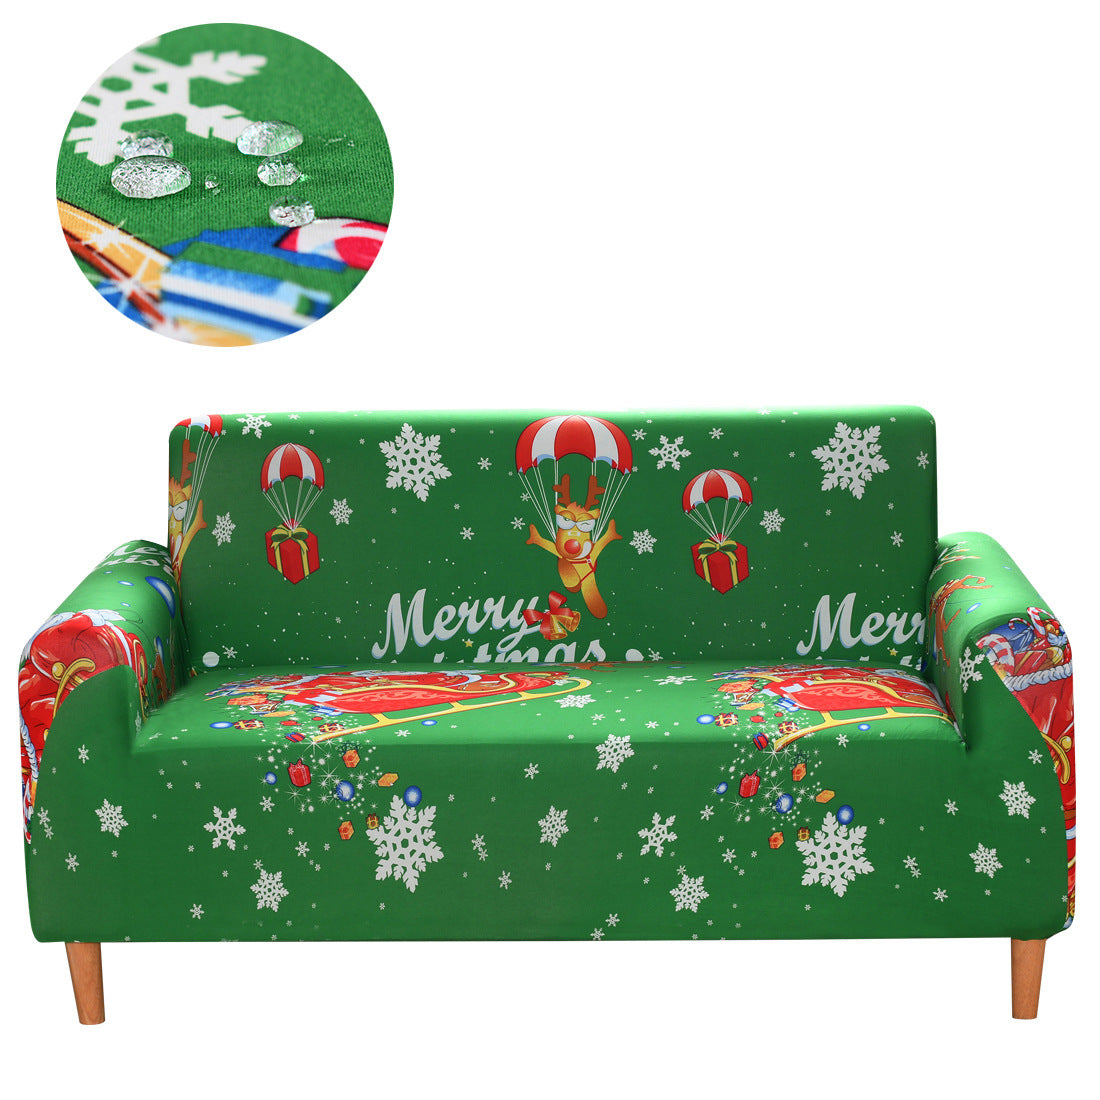 Red and white christmas figures and symbols in green bachground HomeStyle sofa cover